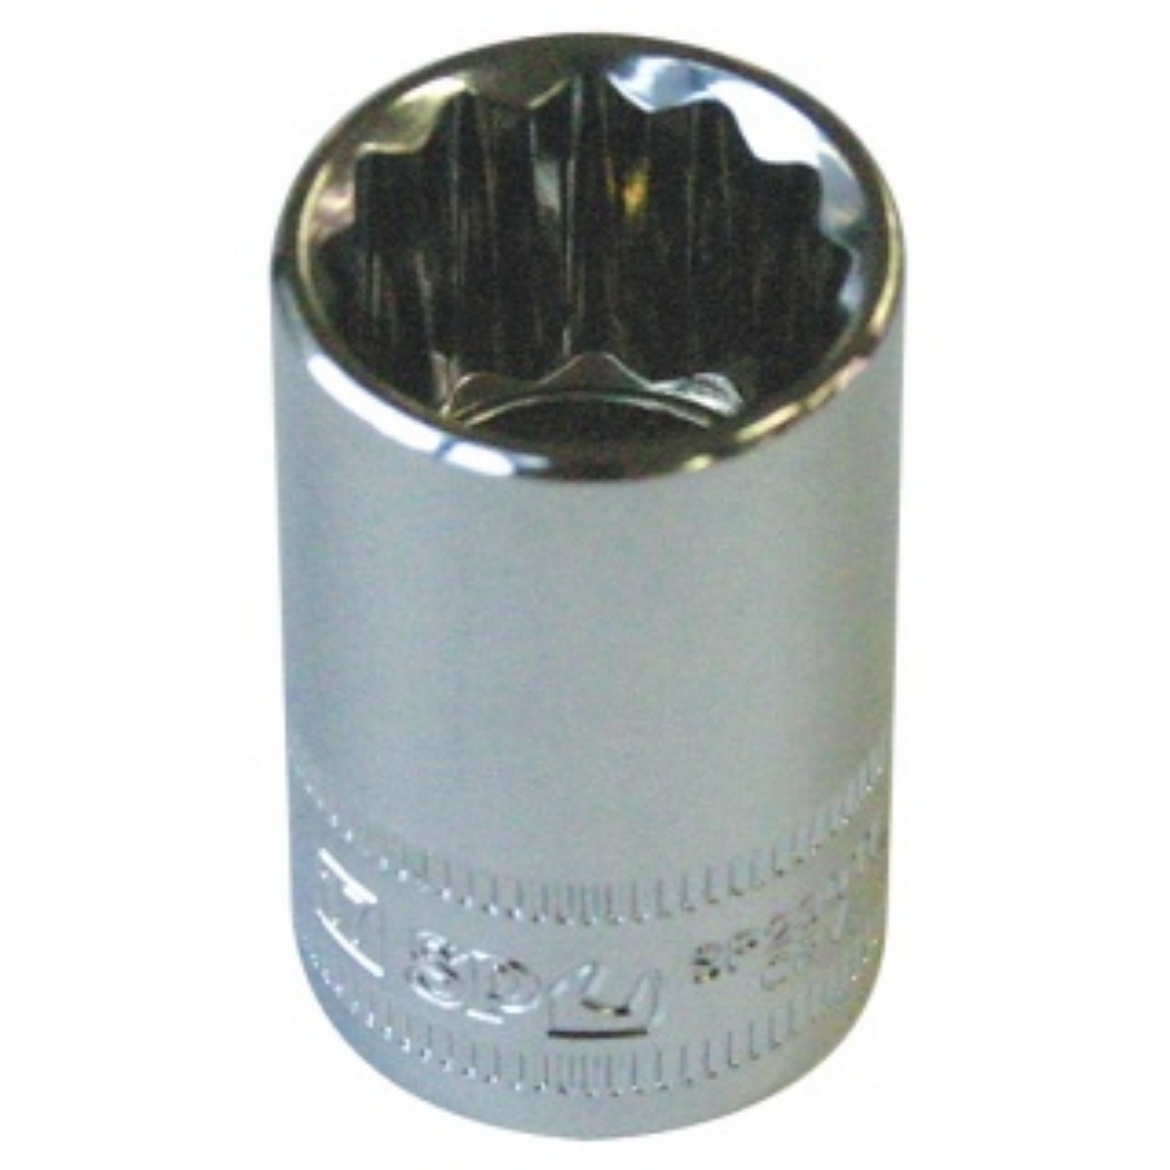 Picture of SOCKET 1/2"DR 12PT METRIC 11MM SP TOOLS